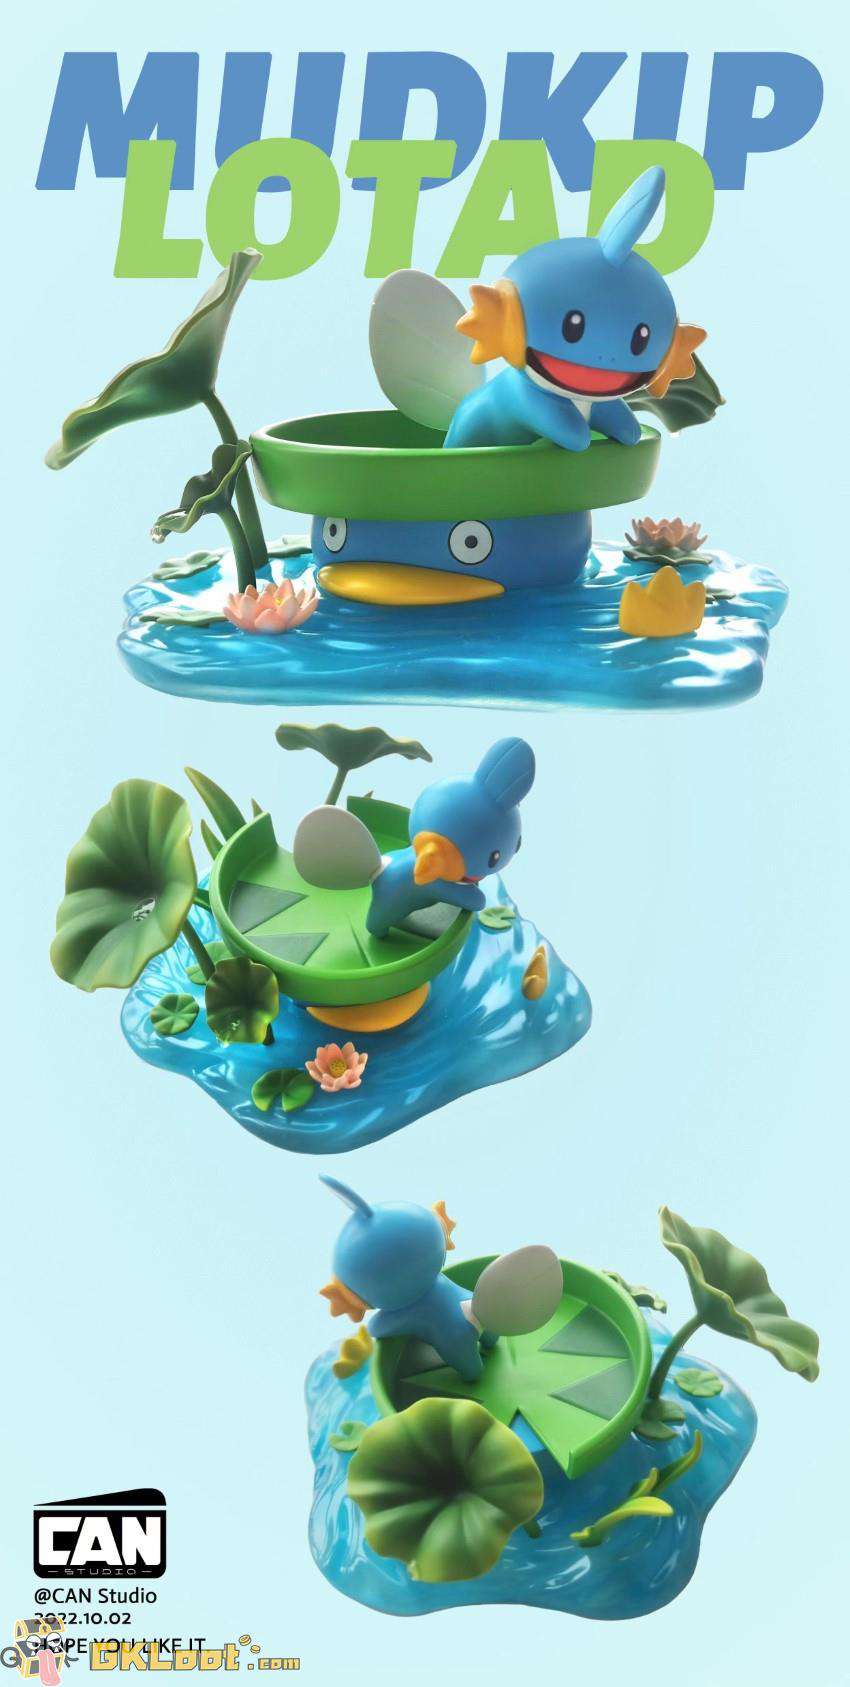 [Out of stock] Can Studio Pokémon Mudkip & Lotad Statue